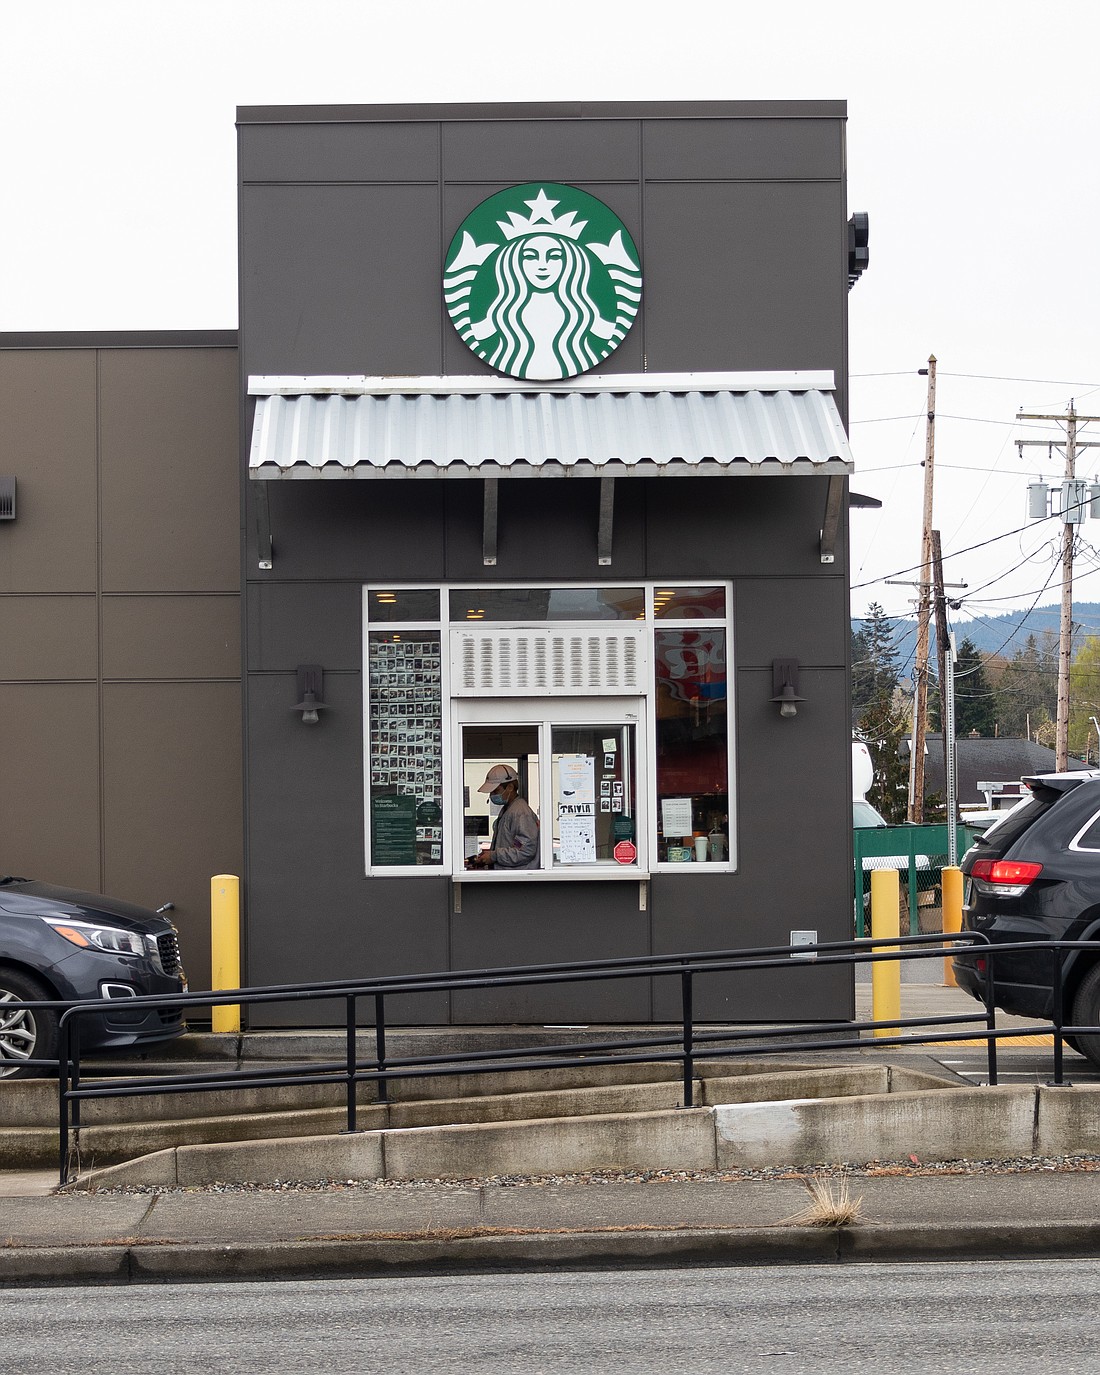 Employees at the Starbucks location on Iowa and King streets have filed to unionize, despite corporate pushback against unions.